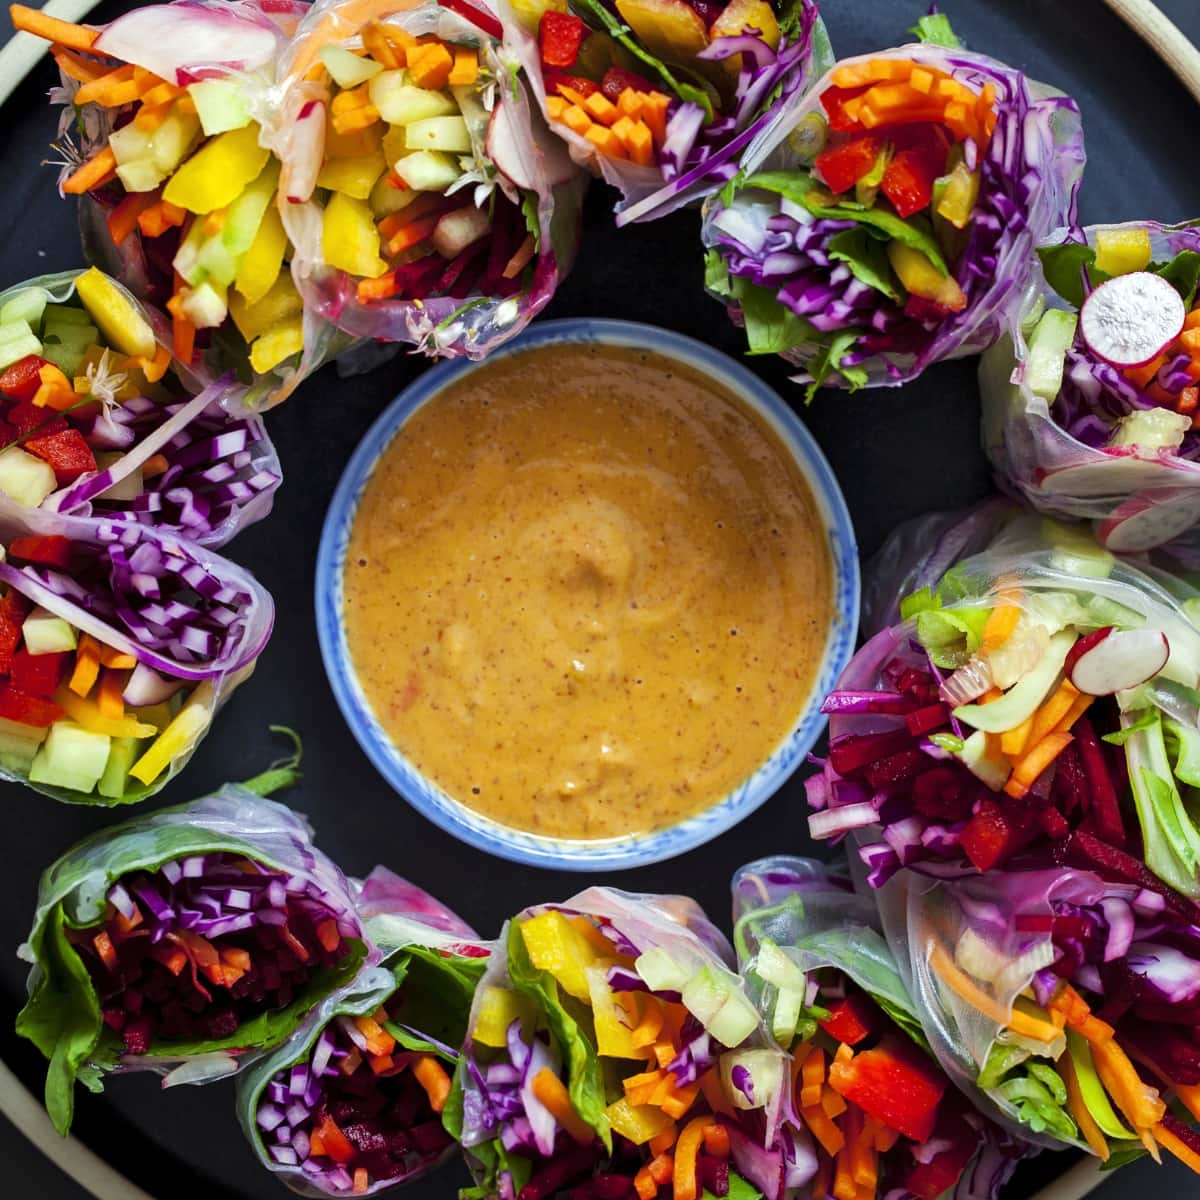 Healthy Thai Peanut Sauce and Asian Spring Rolls in a Plate